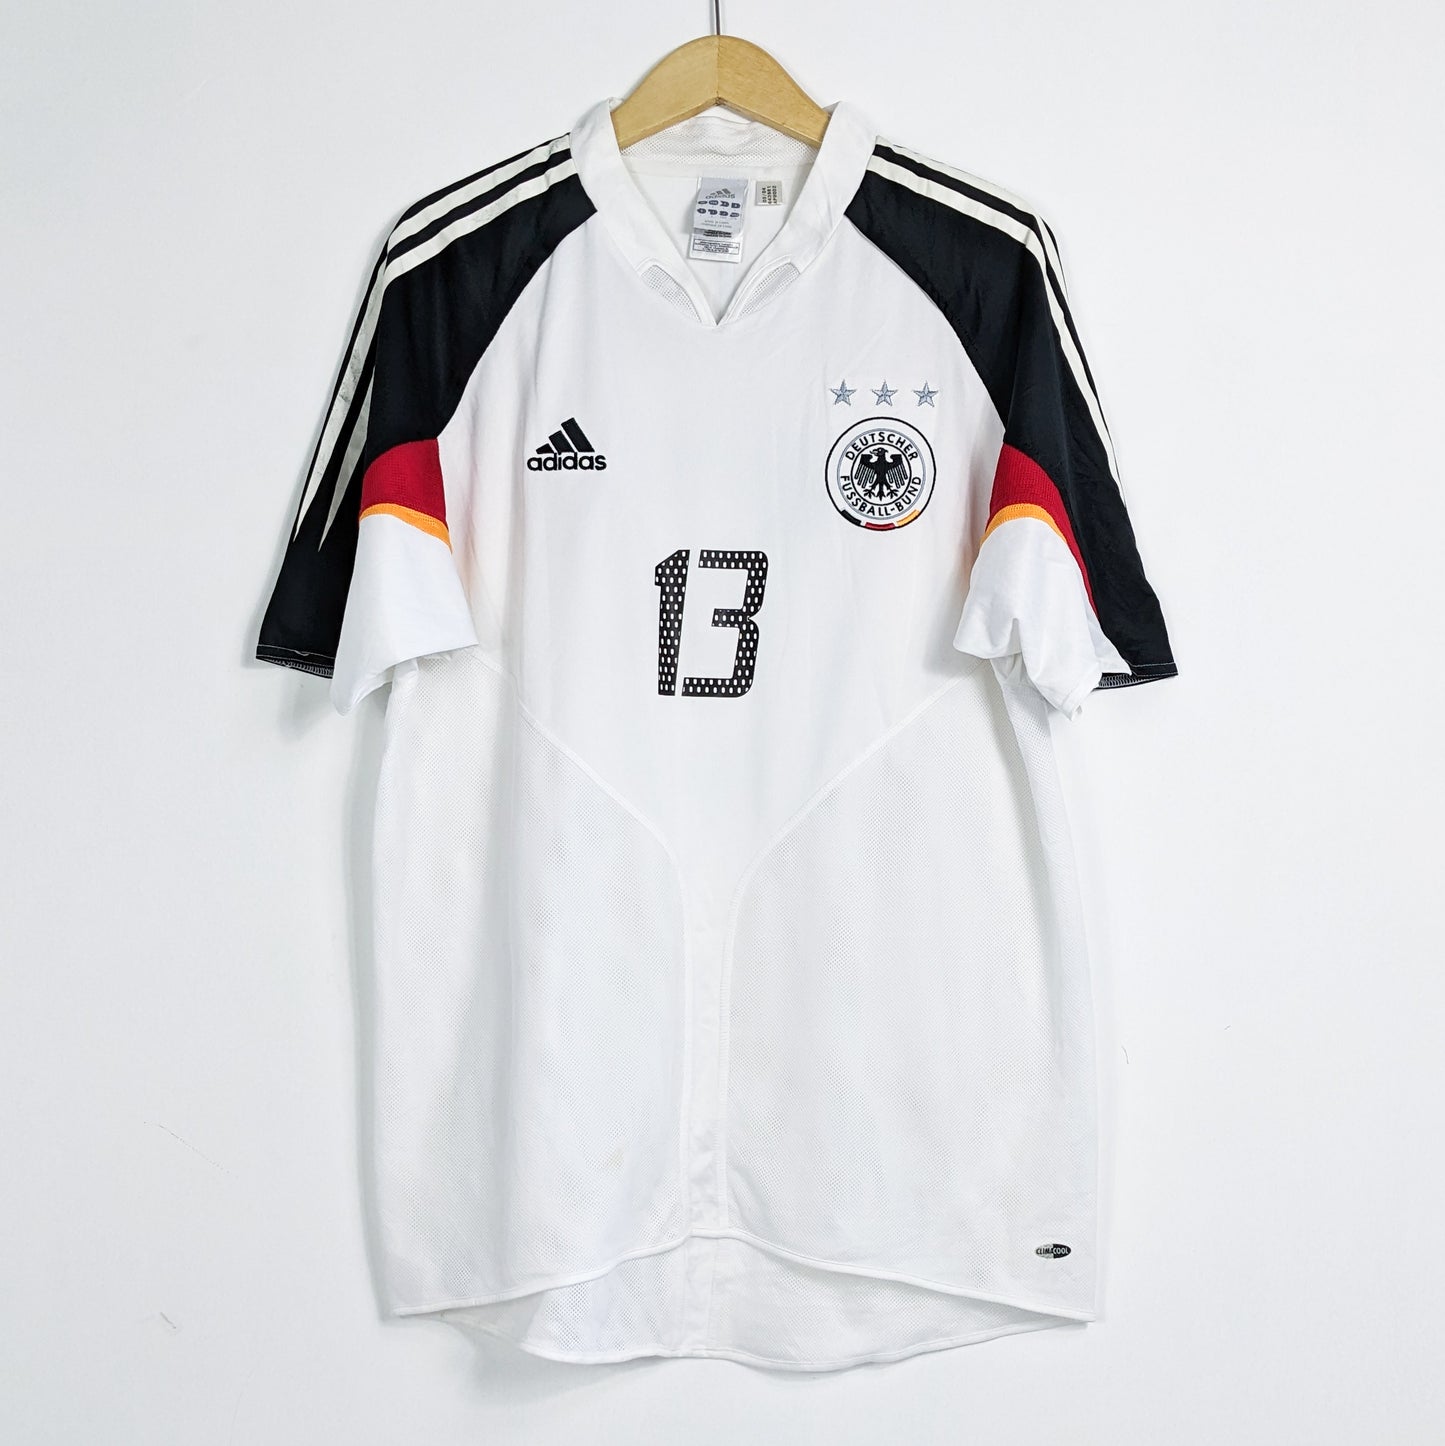 Authentic Germany 2004 - Ballack #13 Size L